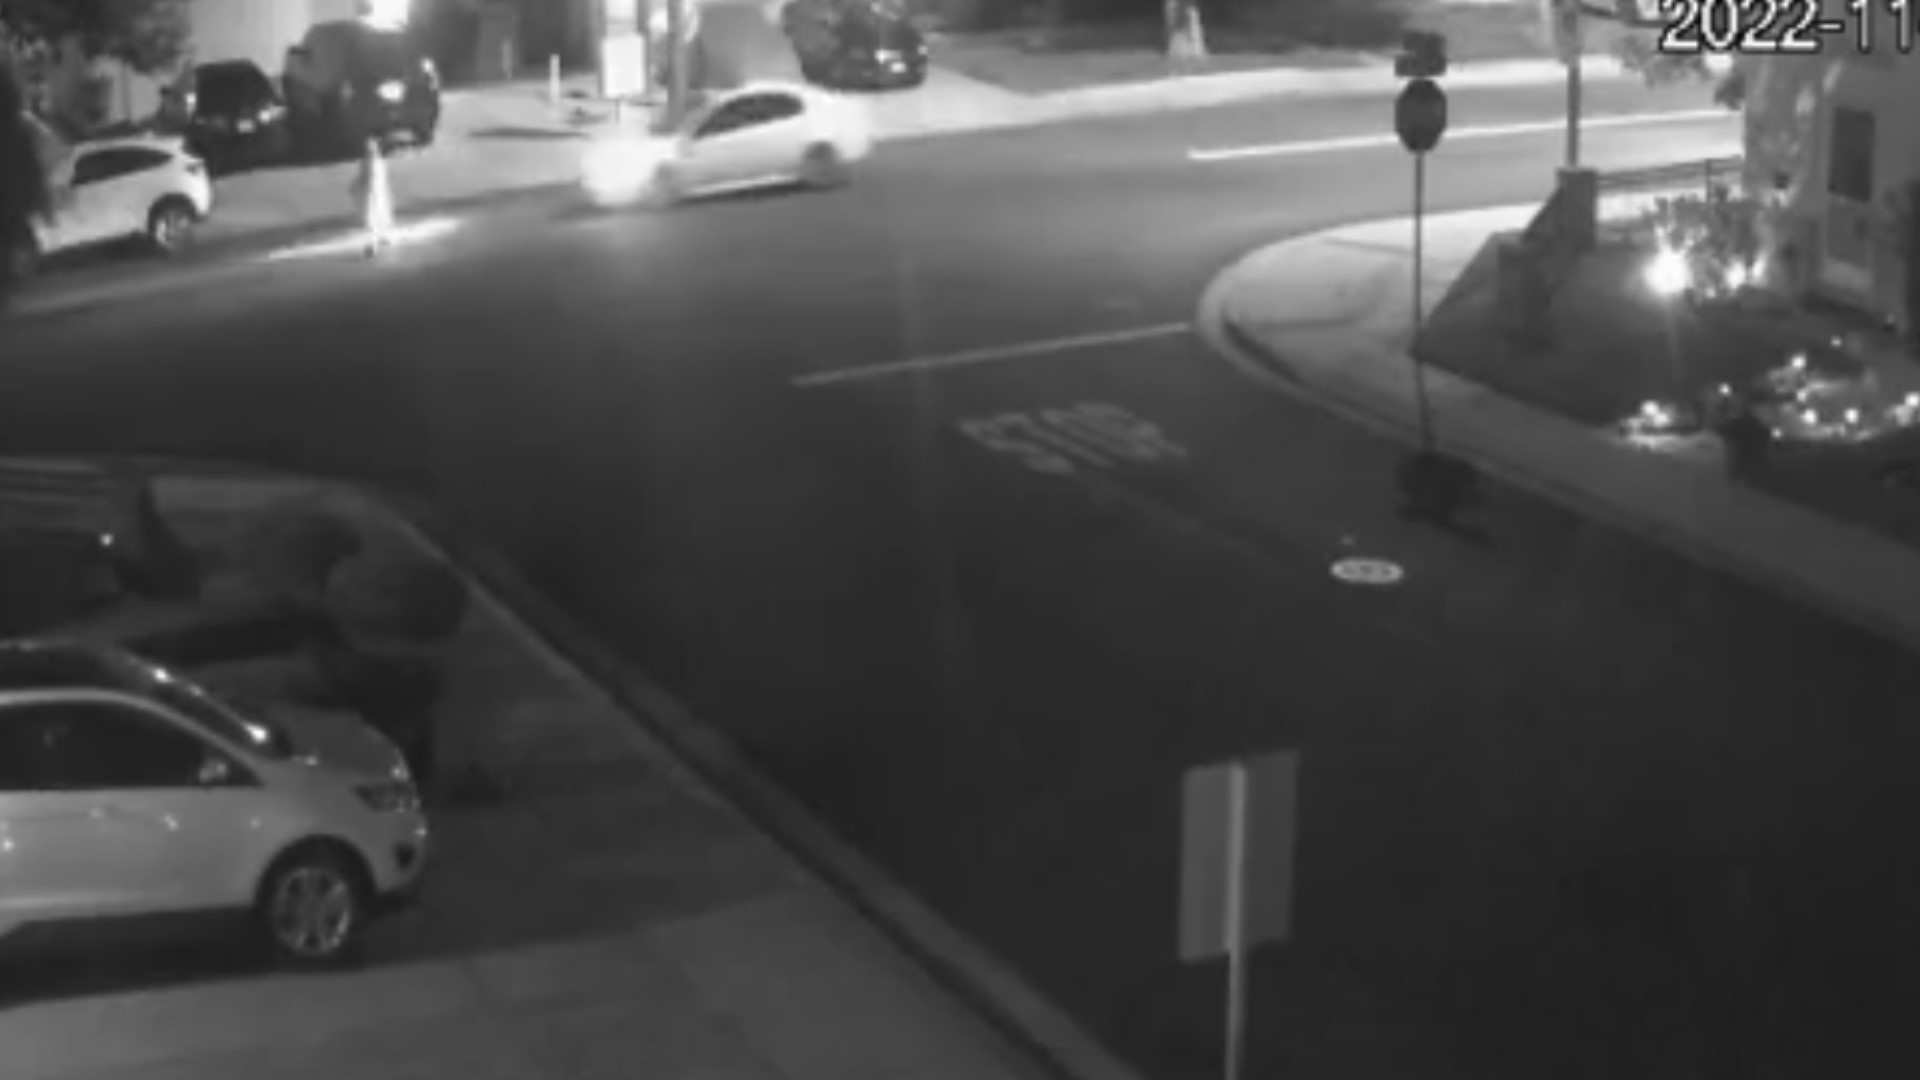 Video shows a person getting out of the passenger side of the vehicle and walking over to the driver's side before driving off and leaving the woman behind.